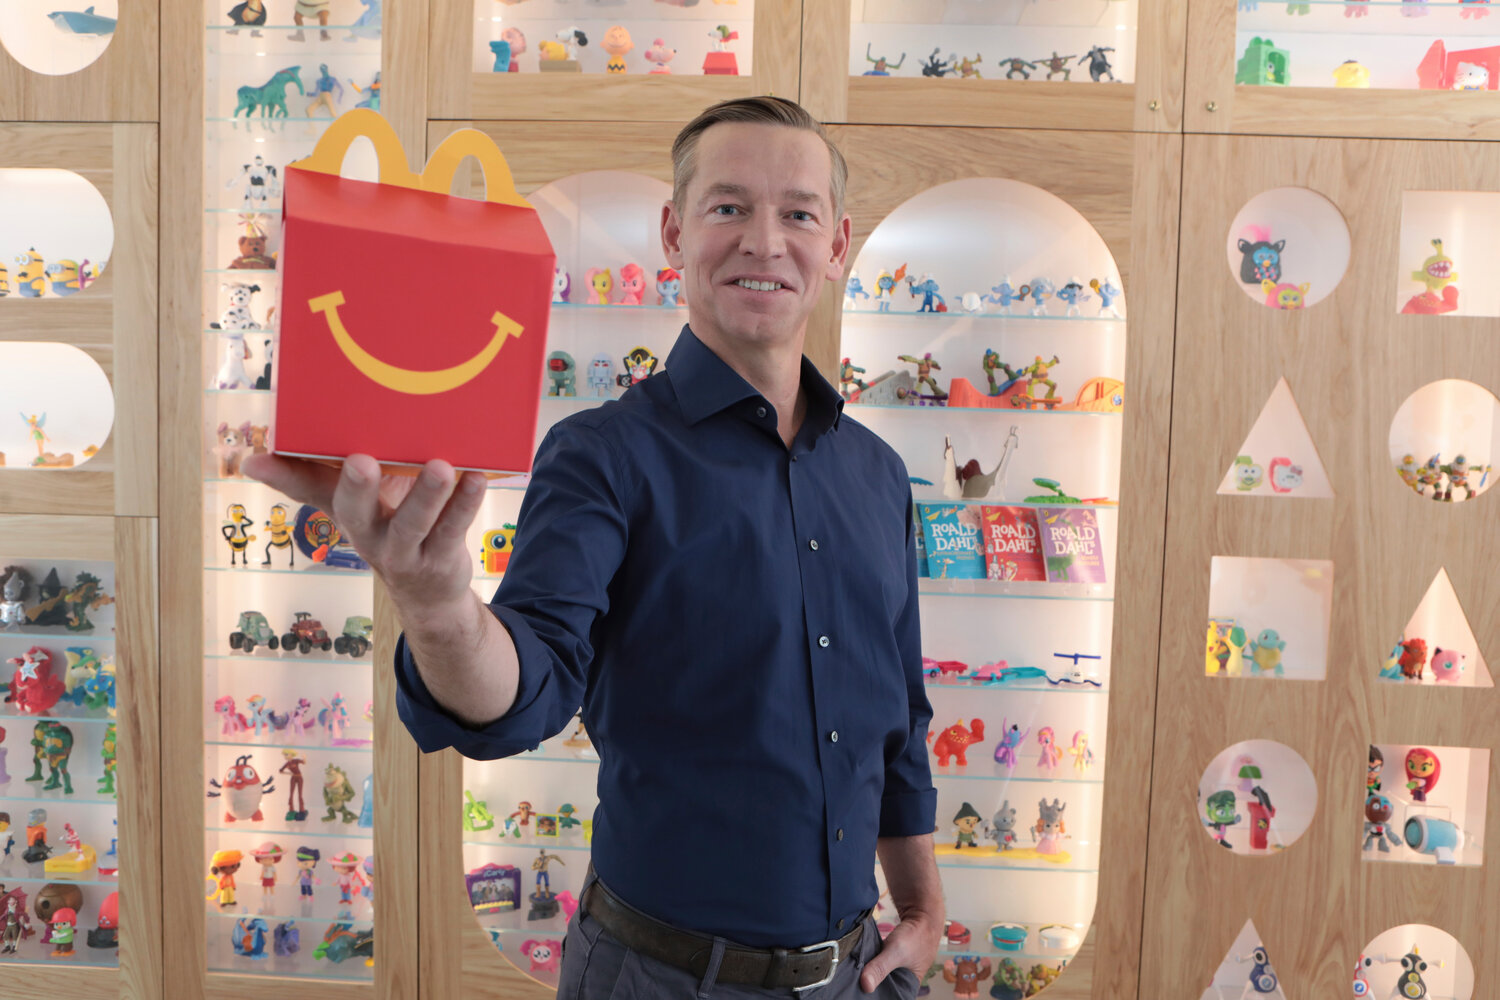 McDonald's CEO Chris Kempczinski, pictured with a Happy Meal at the company’s Chicago headquarters, made 2,251 times more than the average-salaried worker at the Golden Arches last year.